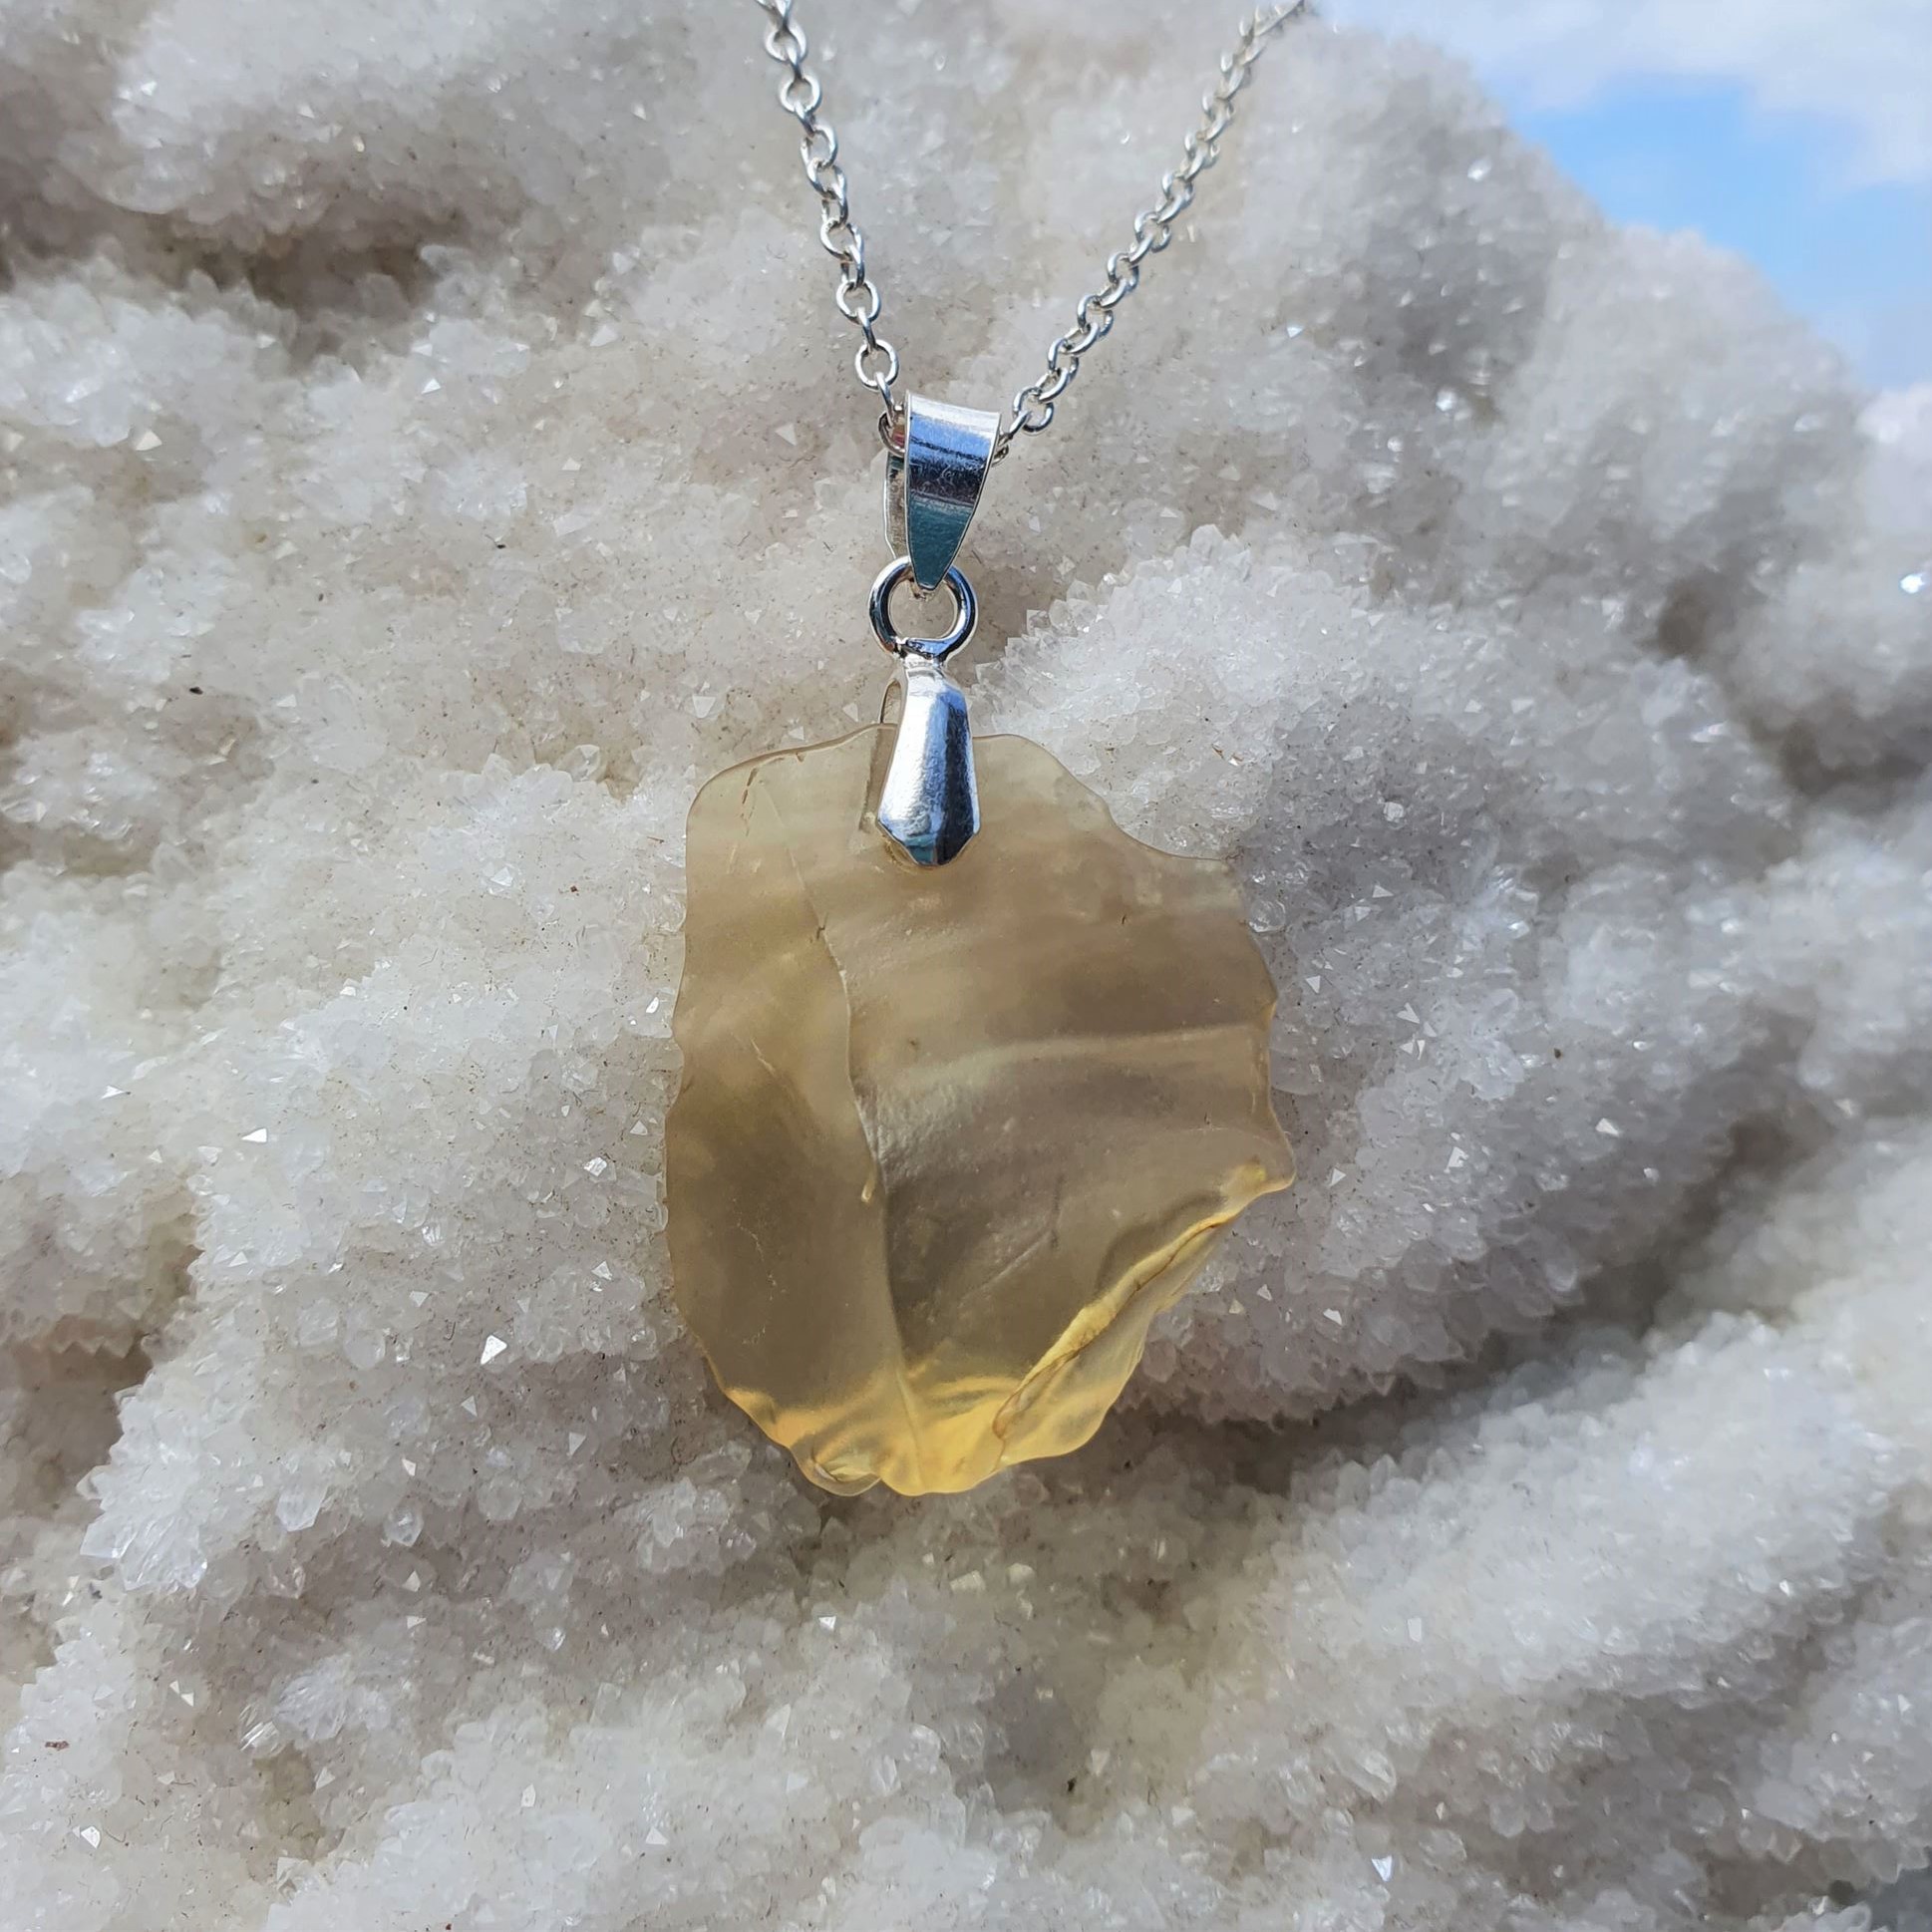 Libyan Desert Glass Pendant – Confidence and Potential 2.79 grams ...